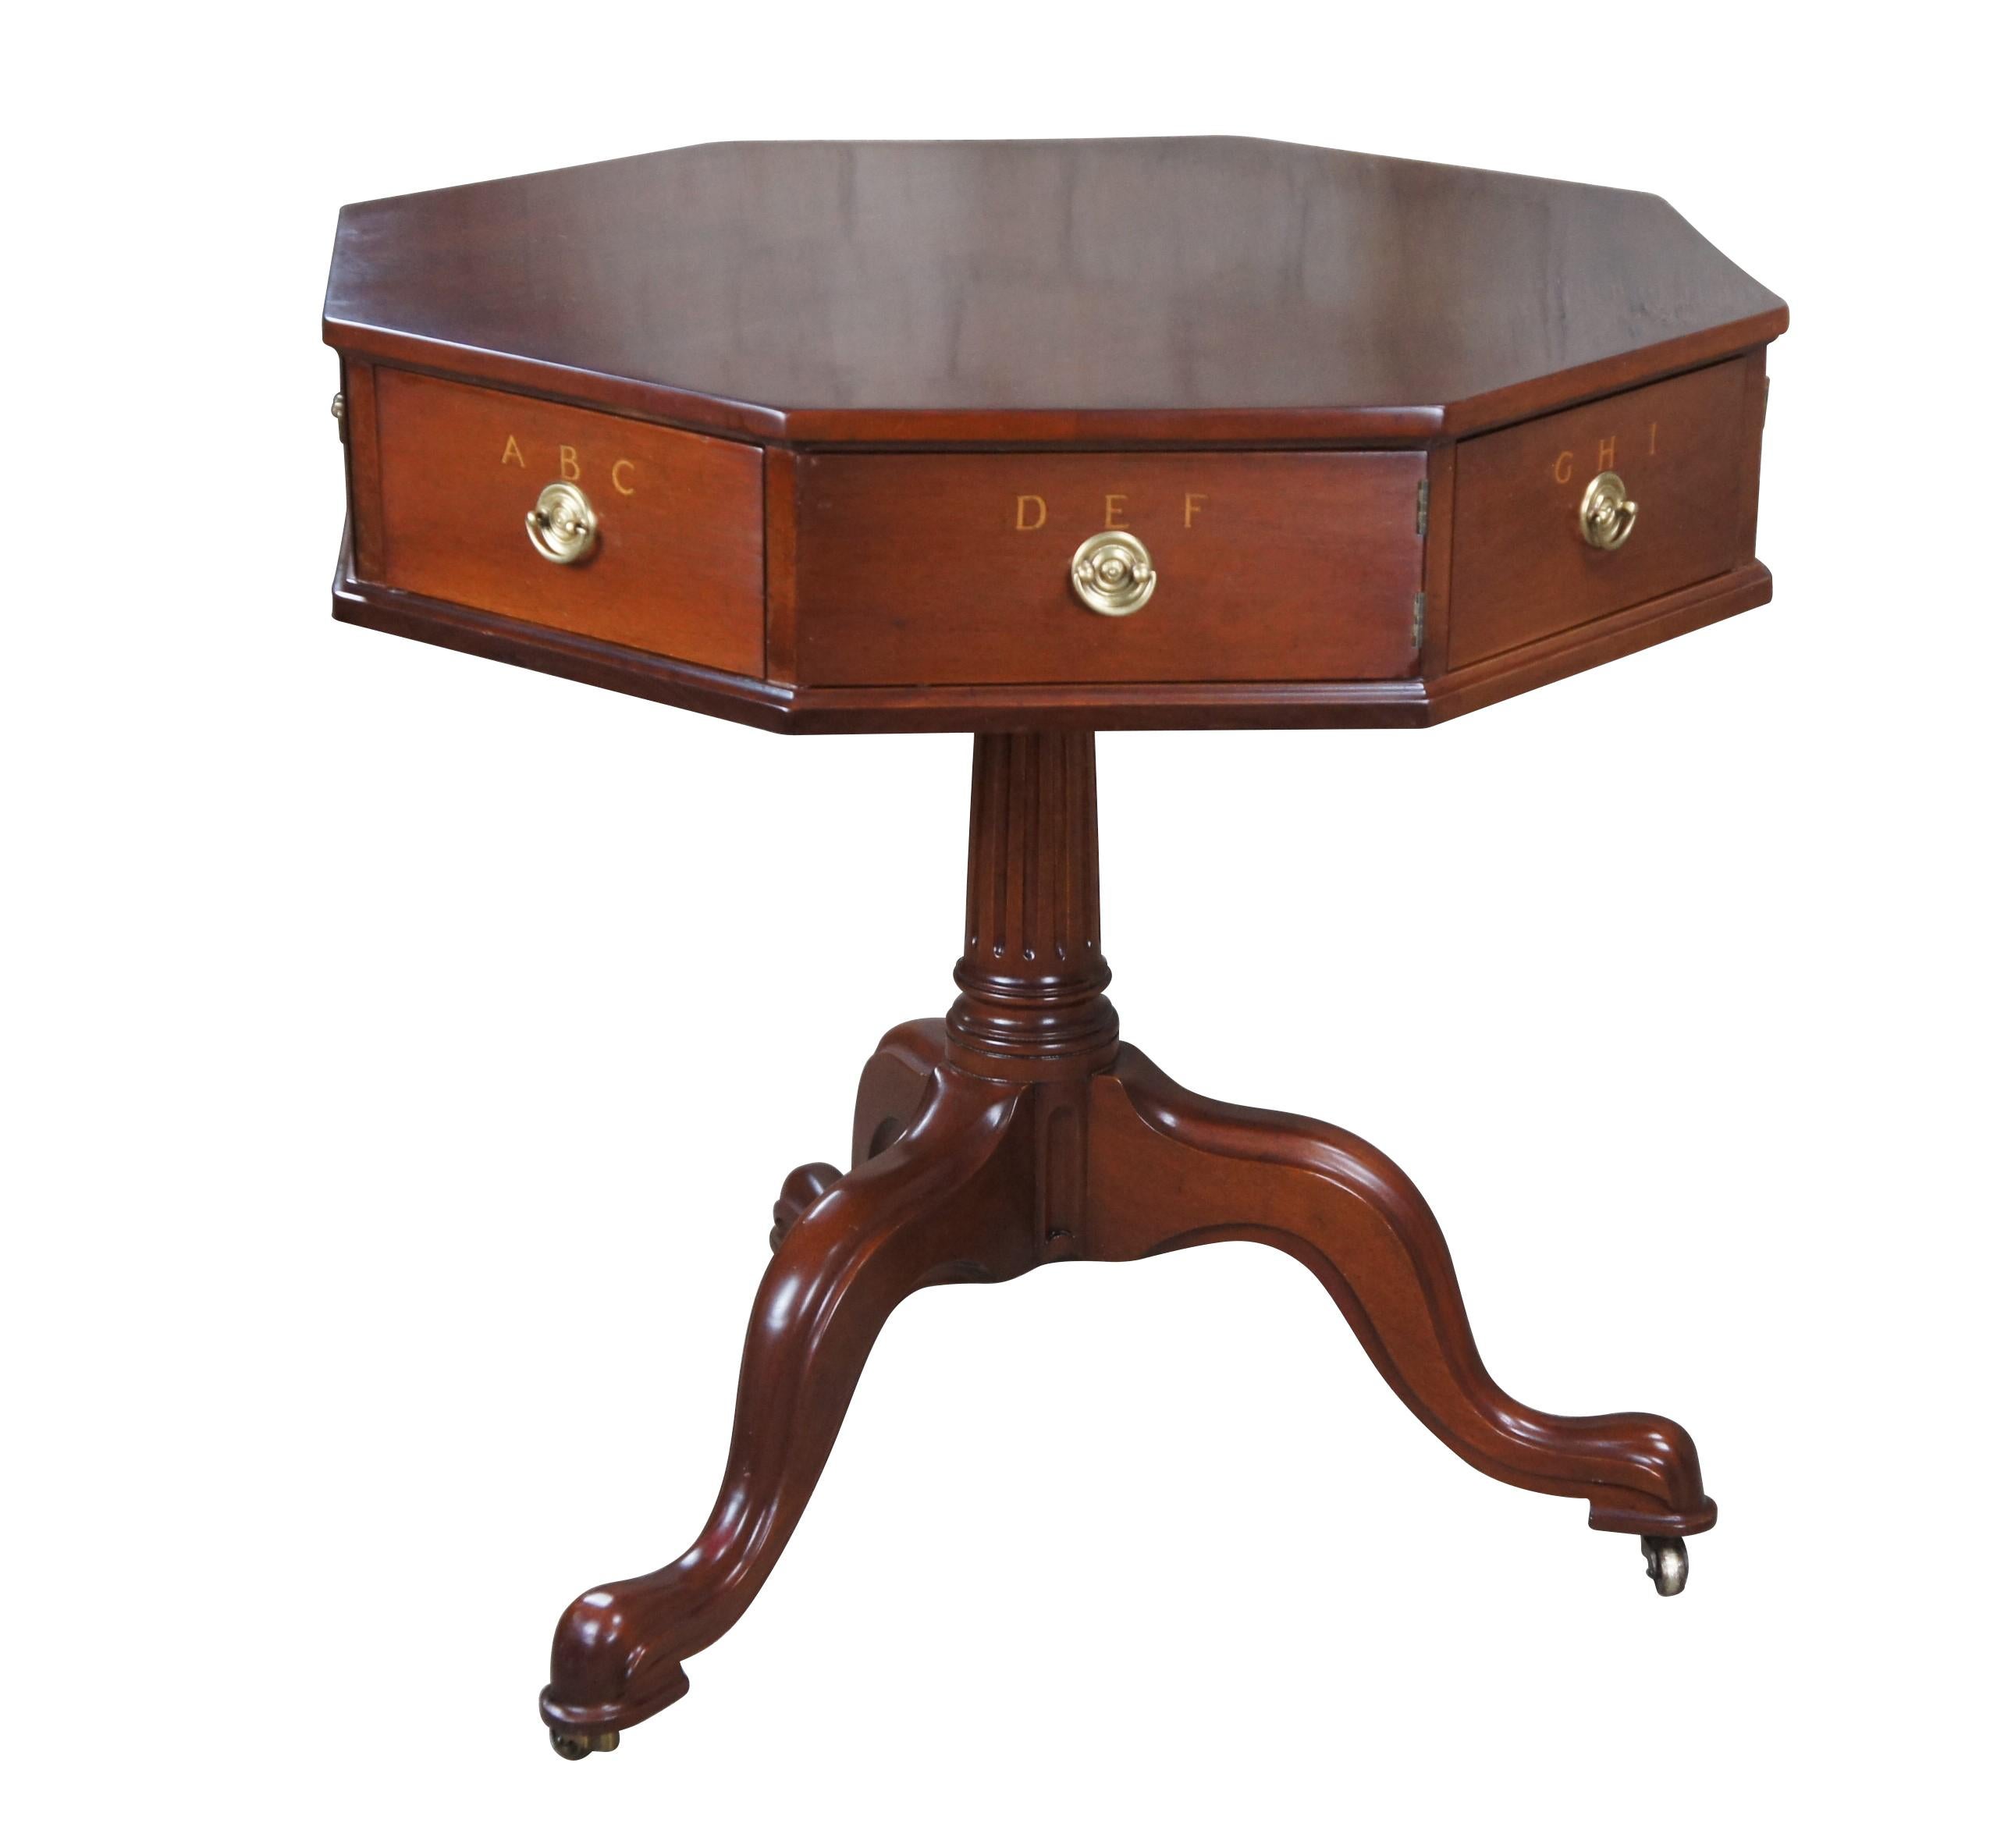 A beautiful mahogany File or Rent table by Kittinger. This table is part of the Thomas Jefferson collection that was authorized by the Thomas Jefferson Memorial Foundation. It is a reproduction of the original table which was used by Thomas